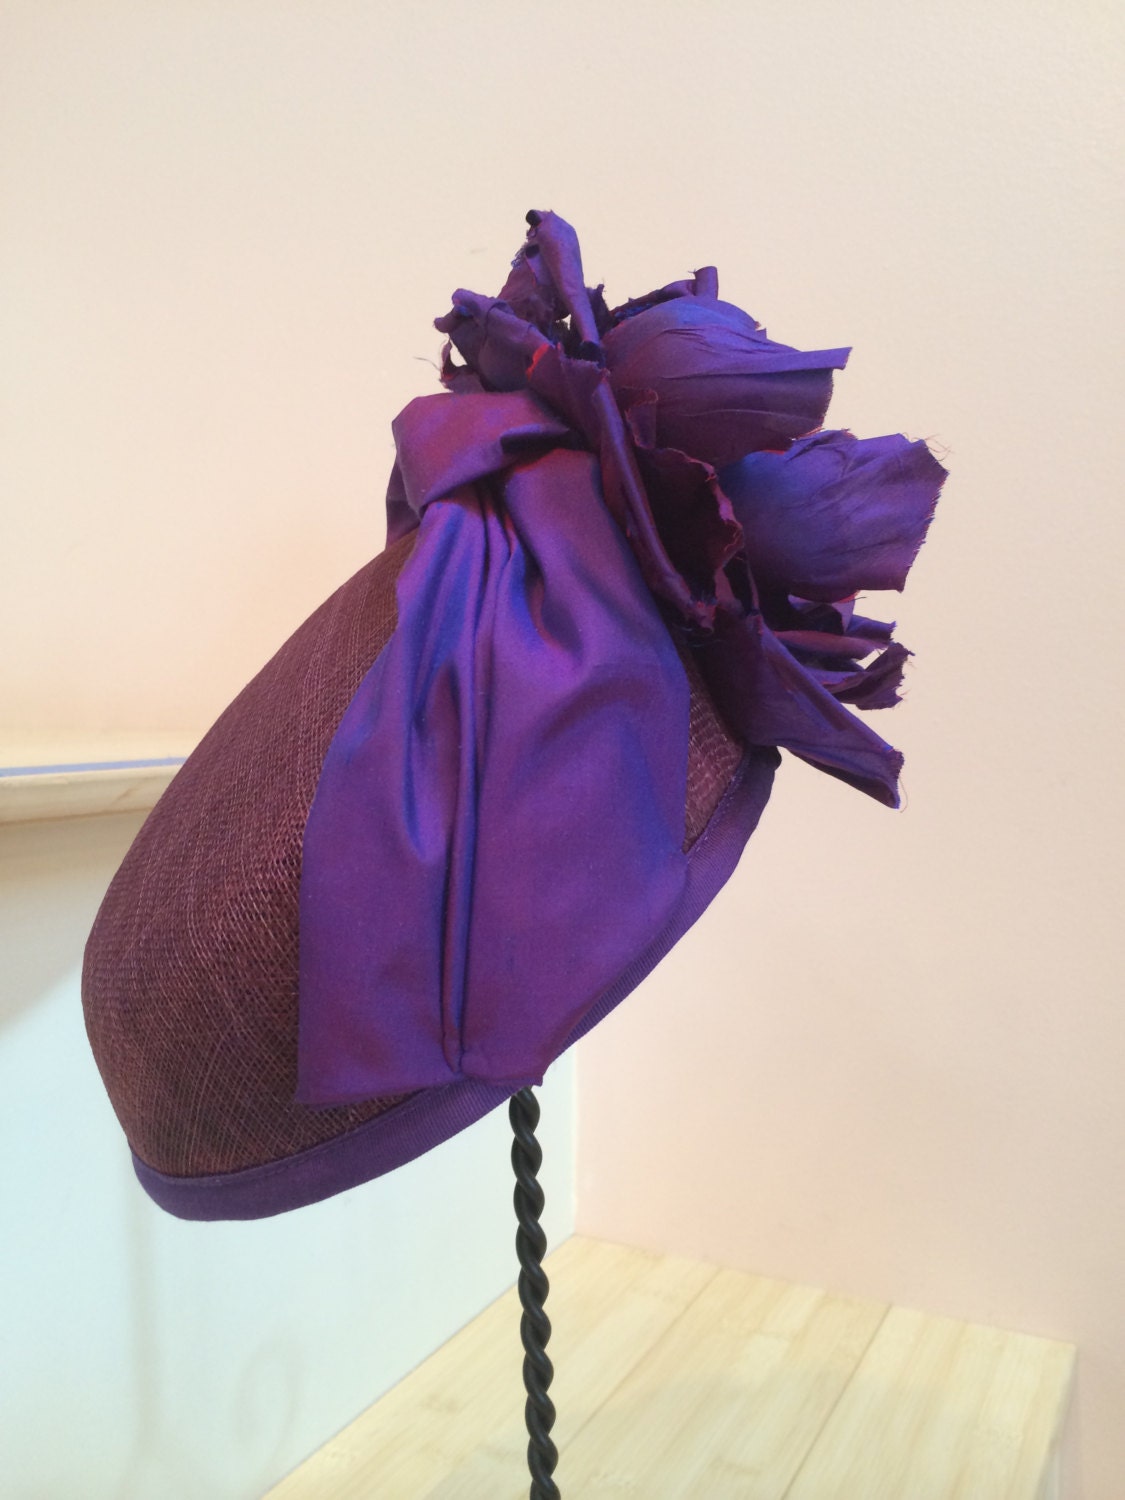 Radiant Orchid Sinamay Pillbox hat, Purple Flower, Church hat, Mother of the Bride or Derby Race Hat-Evening Cocktail Hat-Purple Summer Hat-